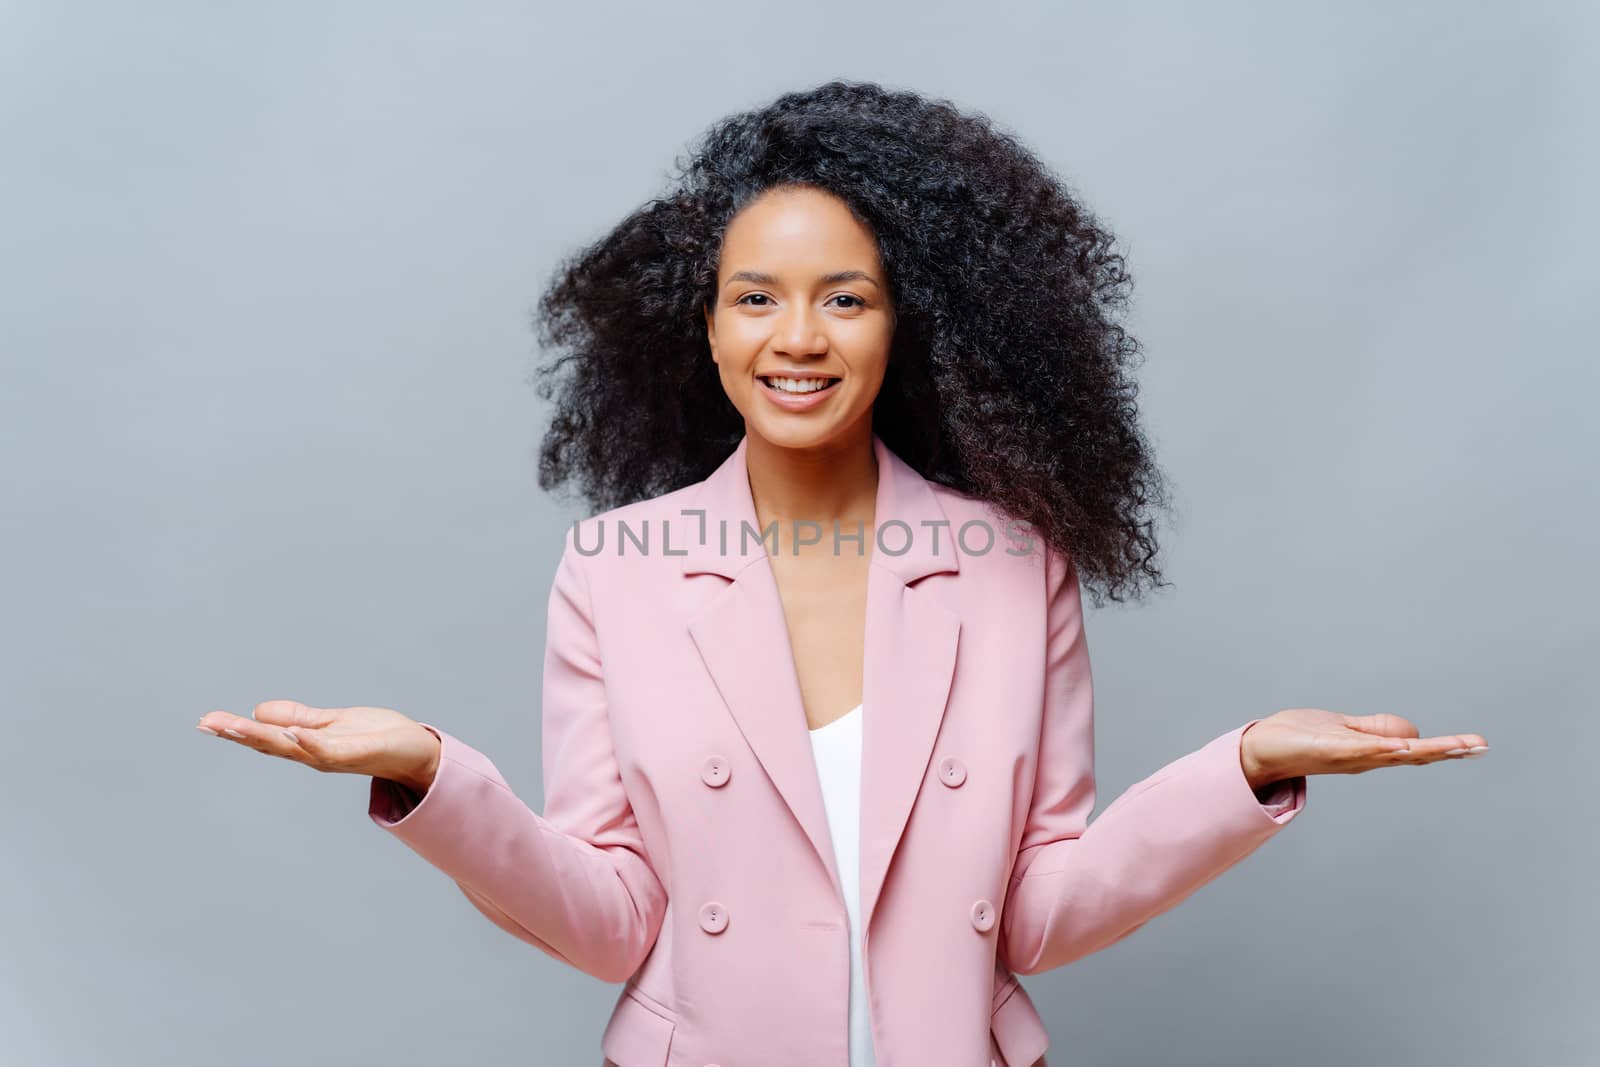 Isolated shot of cheerful female business worker with Afro hairstyle, wears elegant formal violet jacket, raises both palms, presents some product, smiles pleasantly, isolated over grey background.